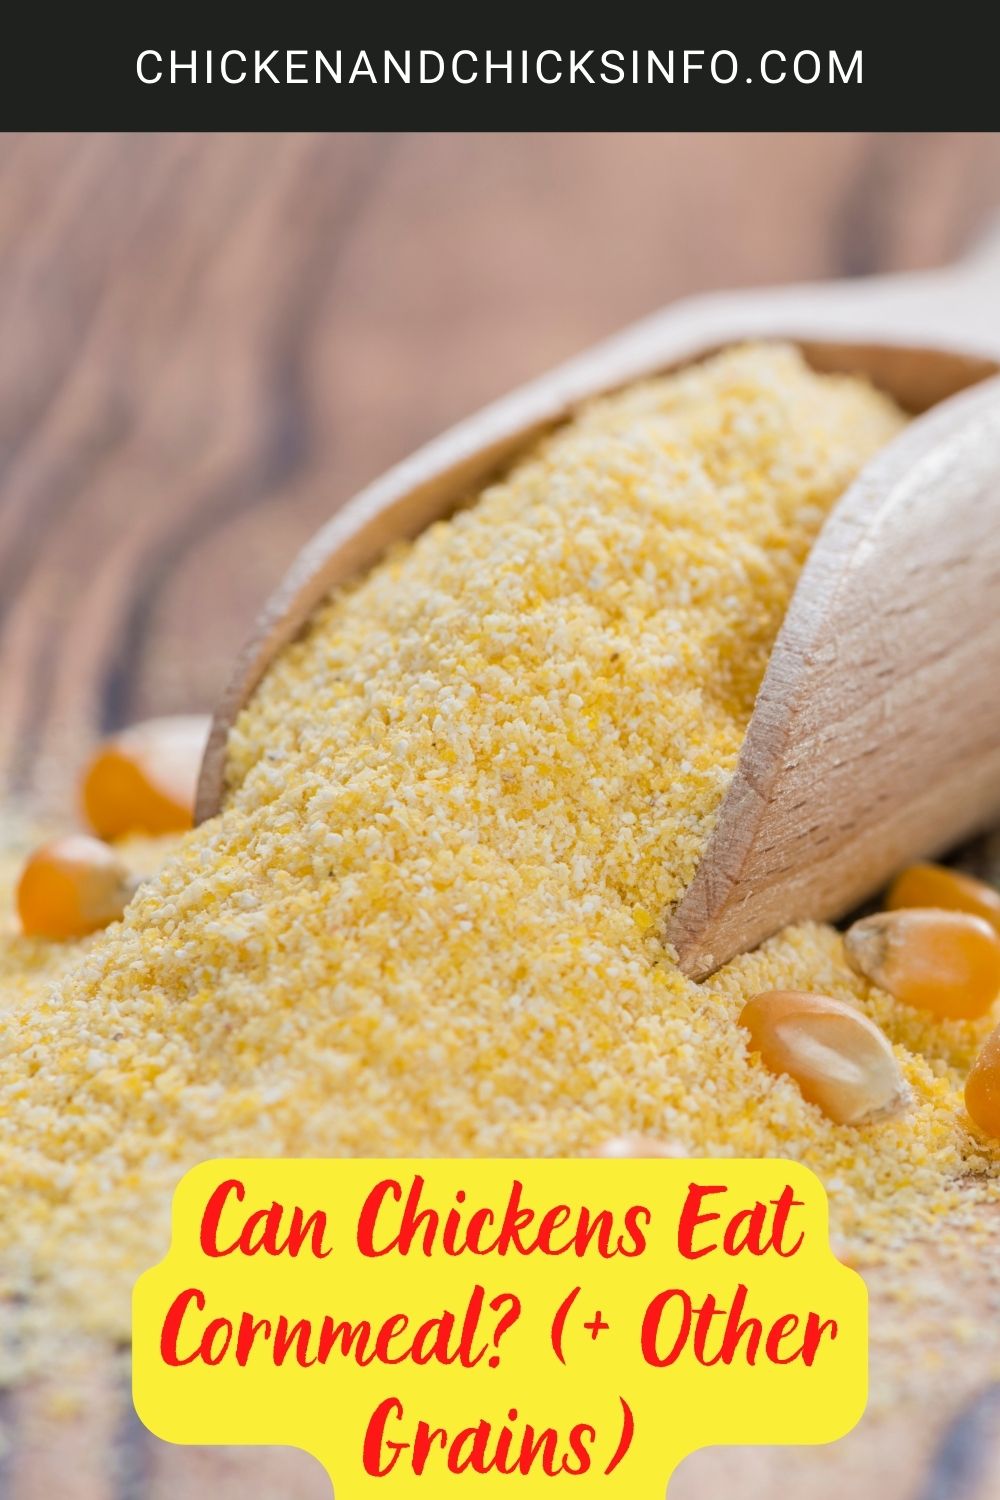 Can Chickens Eat Cornmeal? (+ Other Grains) poster.
